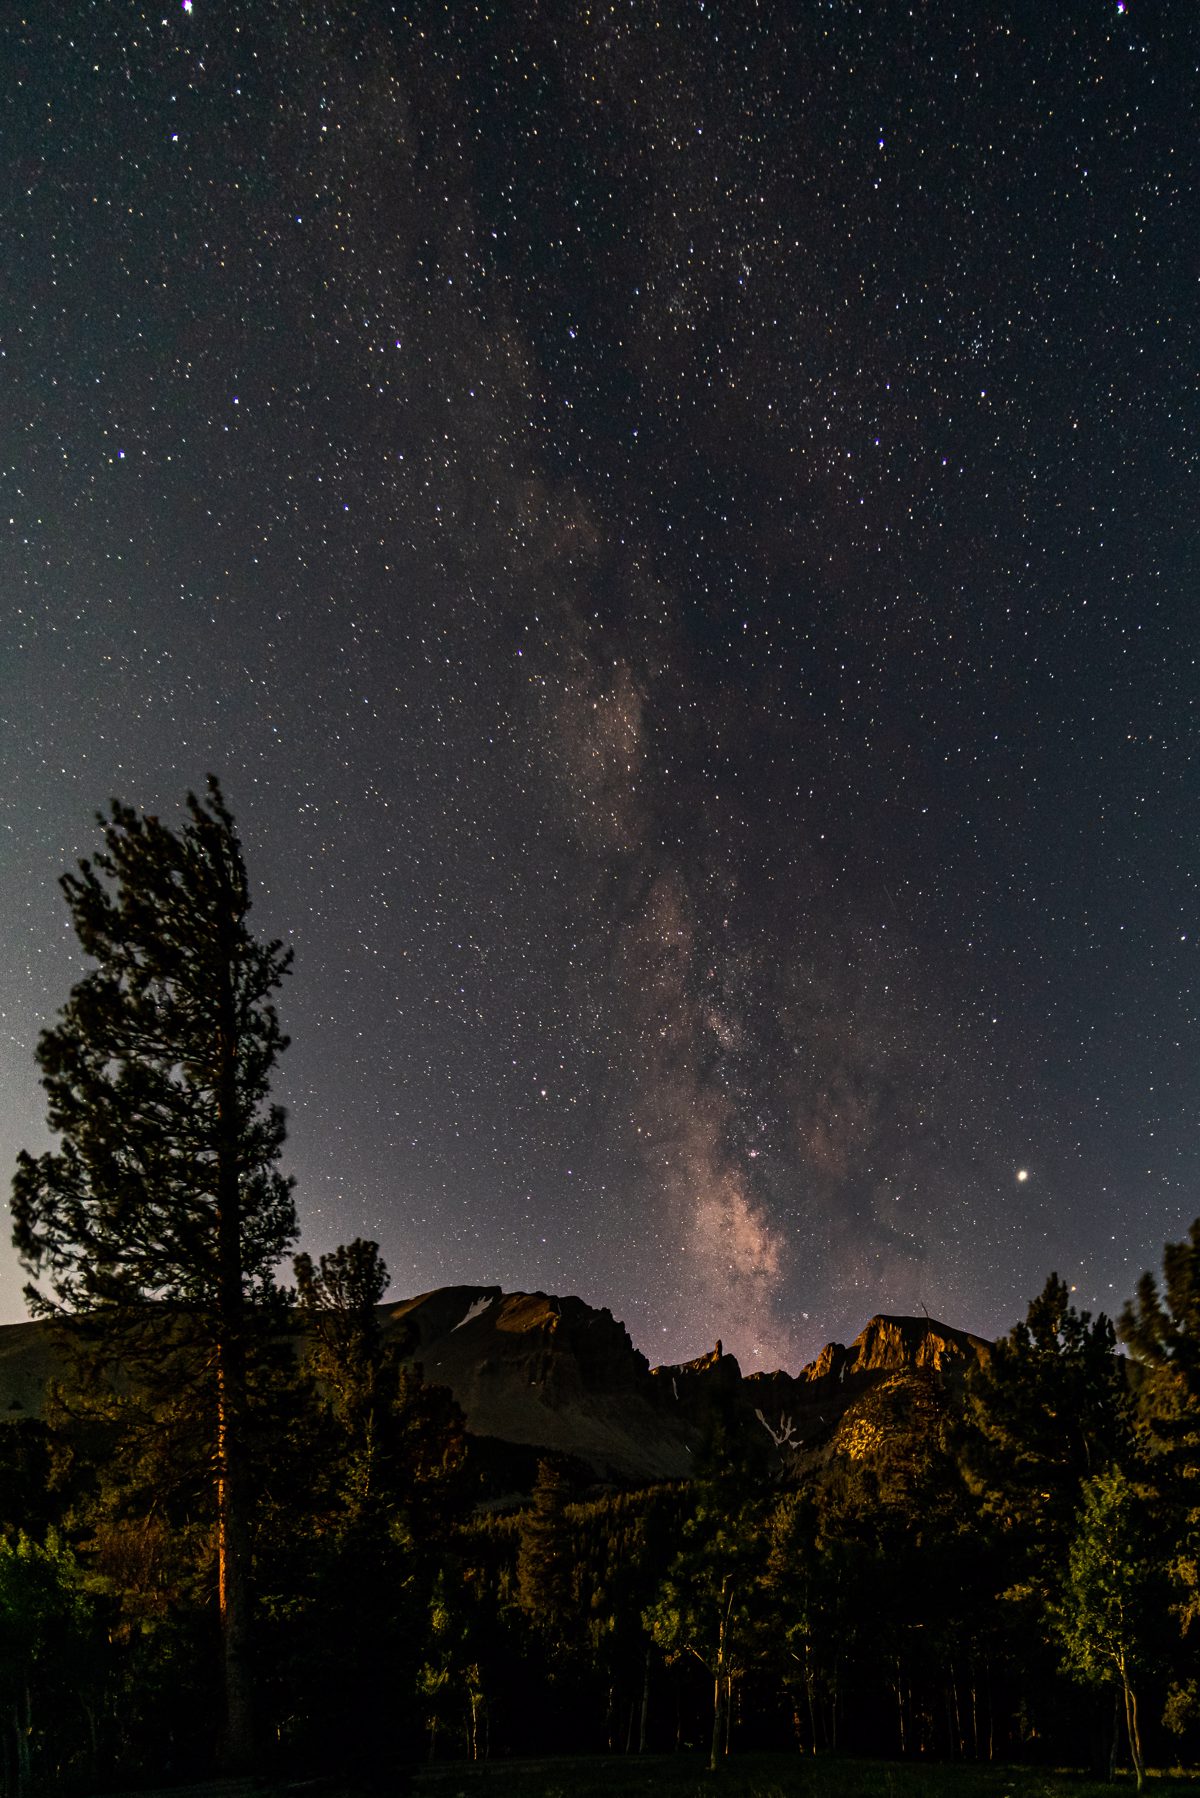 2019 August Moonlight and Milky Way in Great Basin National Park